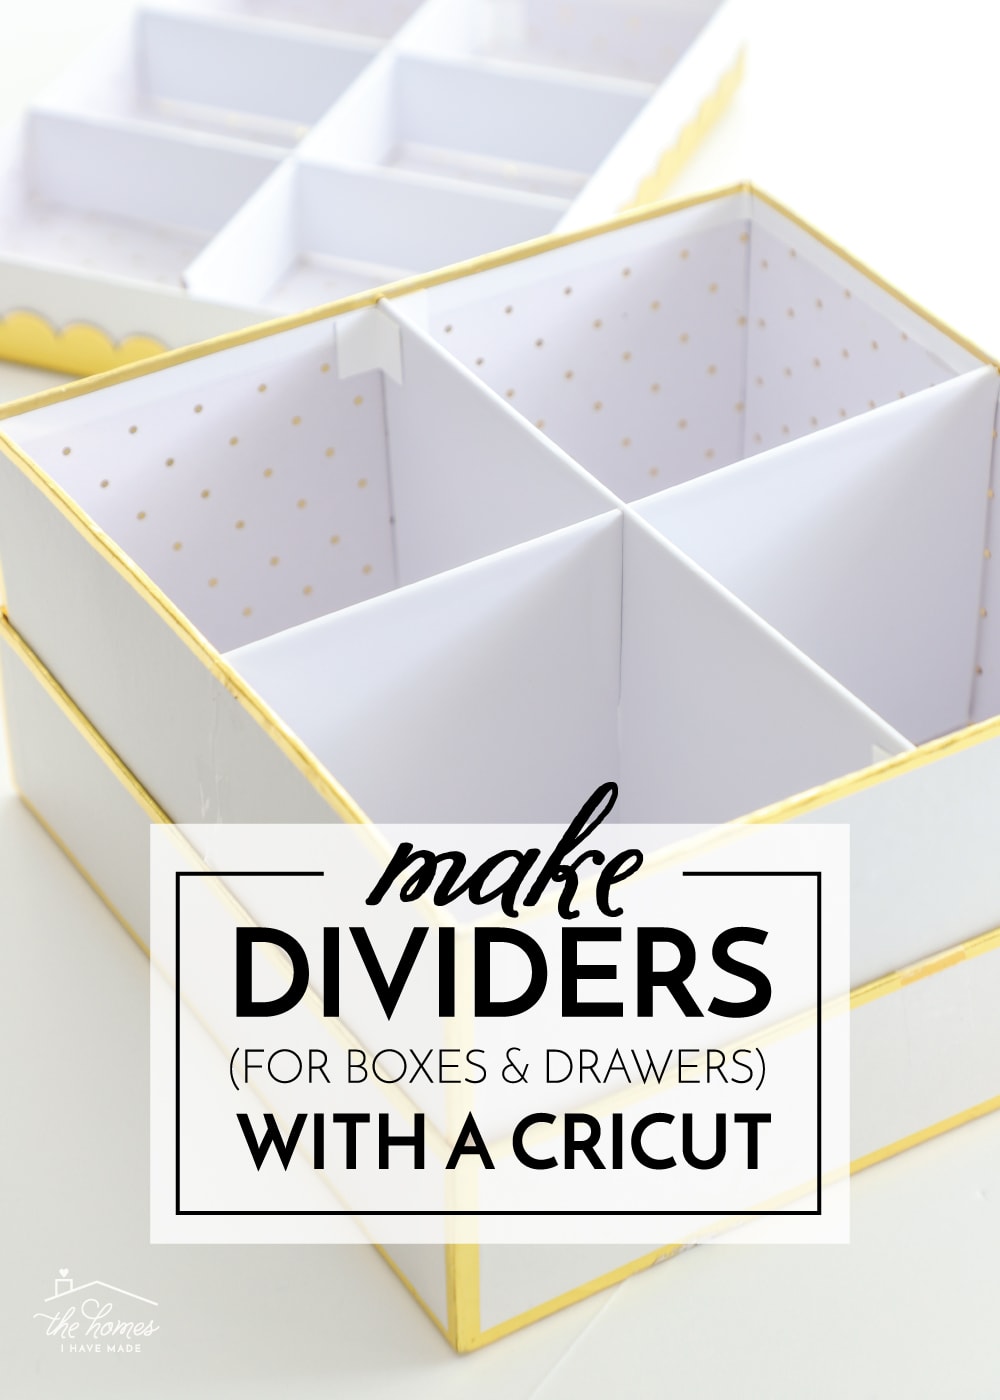 Drawer Dividers With a Cricut